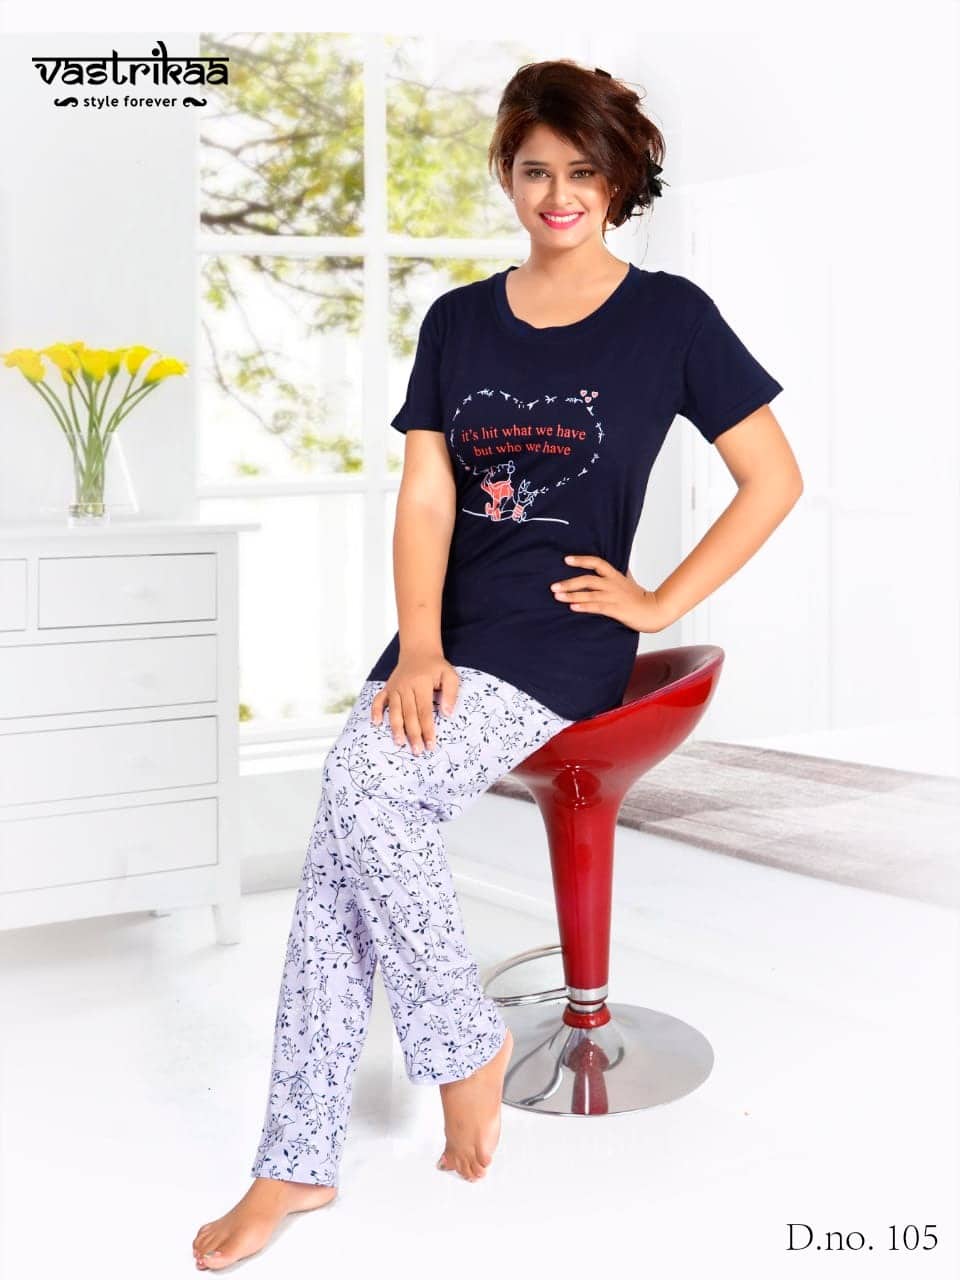 Vastrikaa comfy lounge wear night dress collection